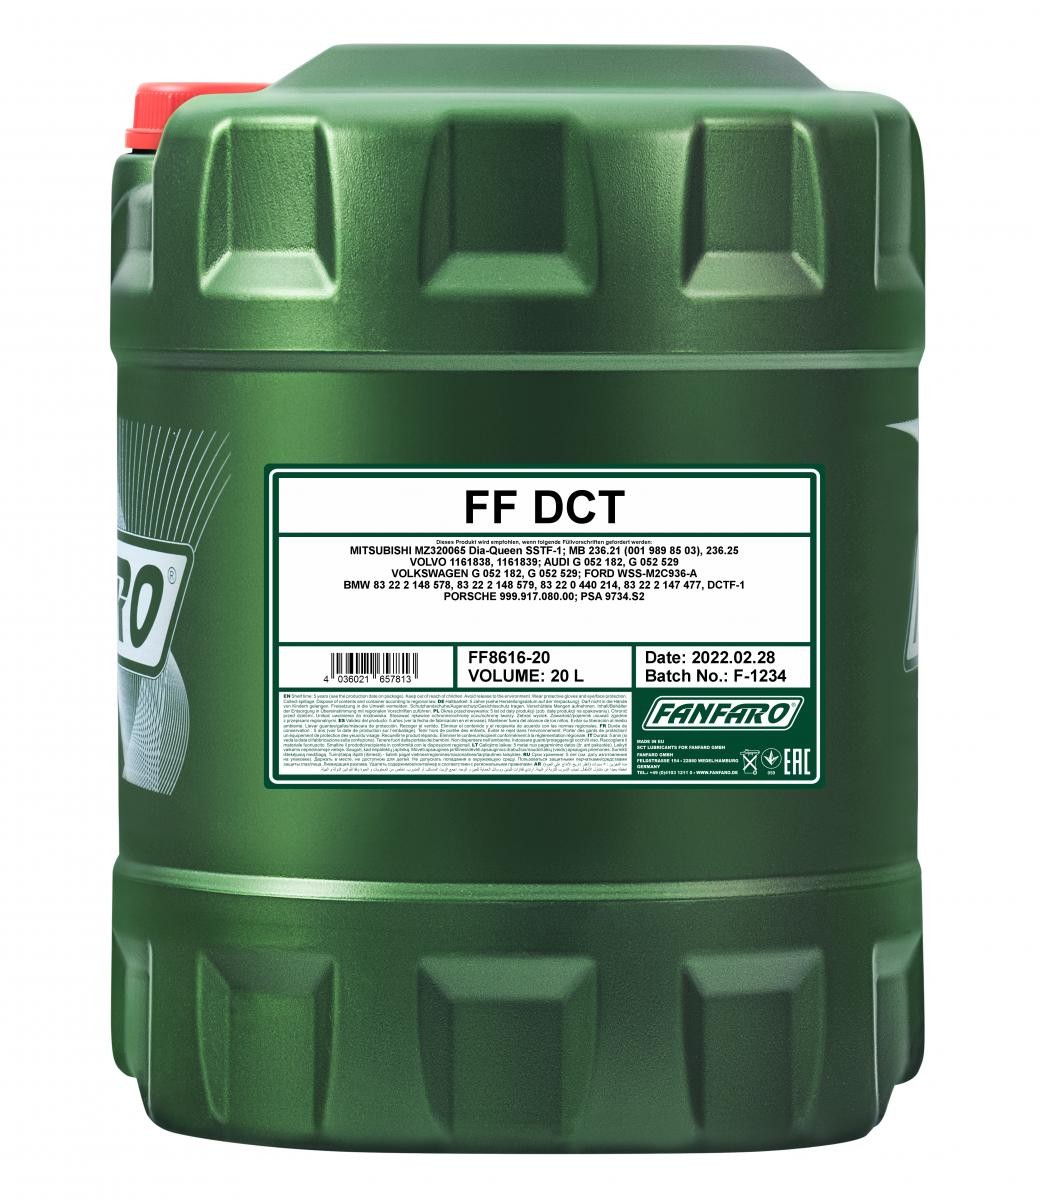 FANFARO FF8616-20 Manual Transmission Oil LAND ROVER experience and price